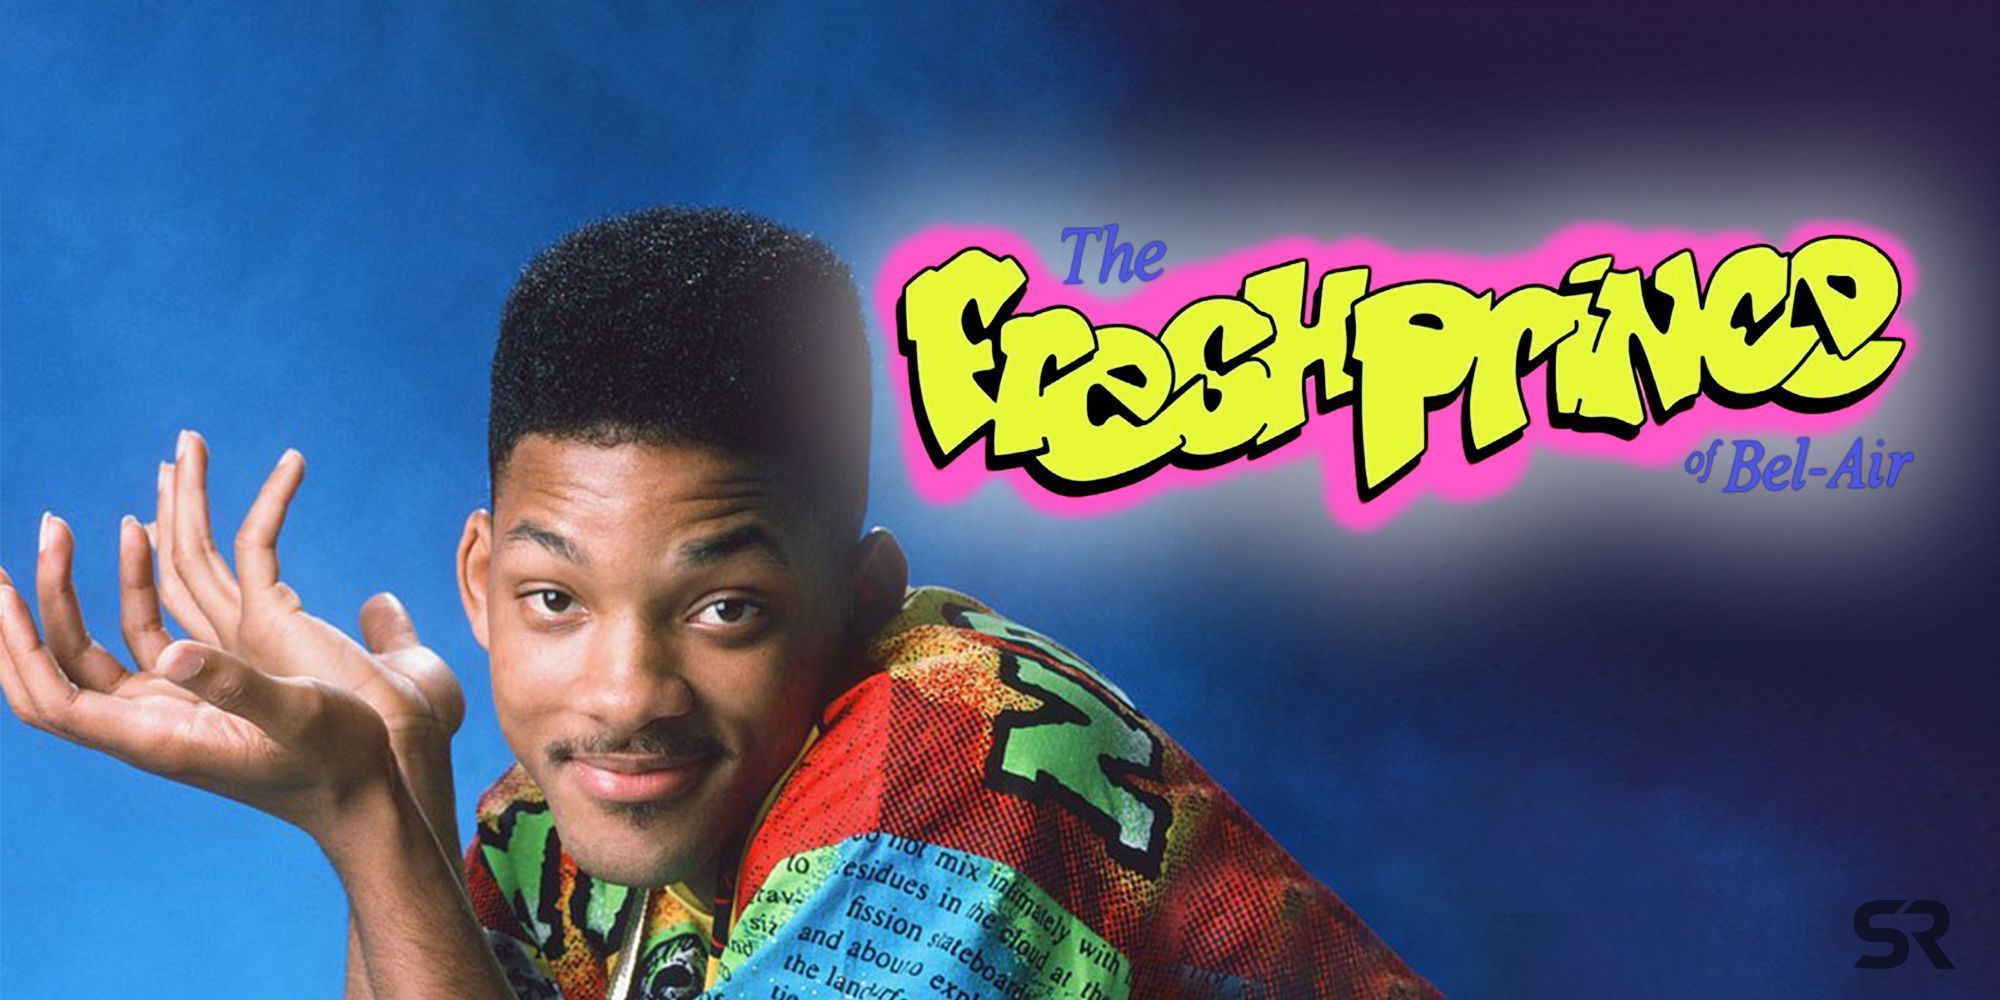 Will Smith in a poster for The Fresh Prince of Bel-Air